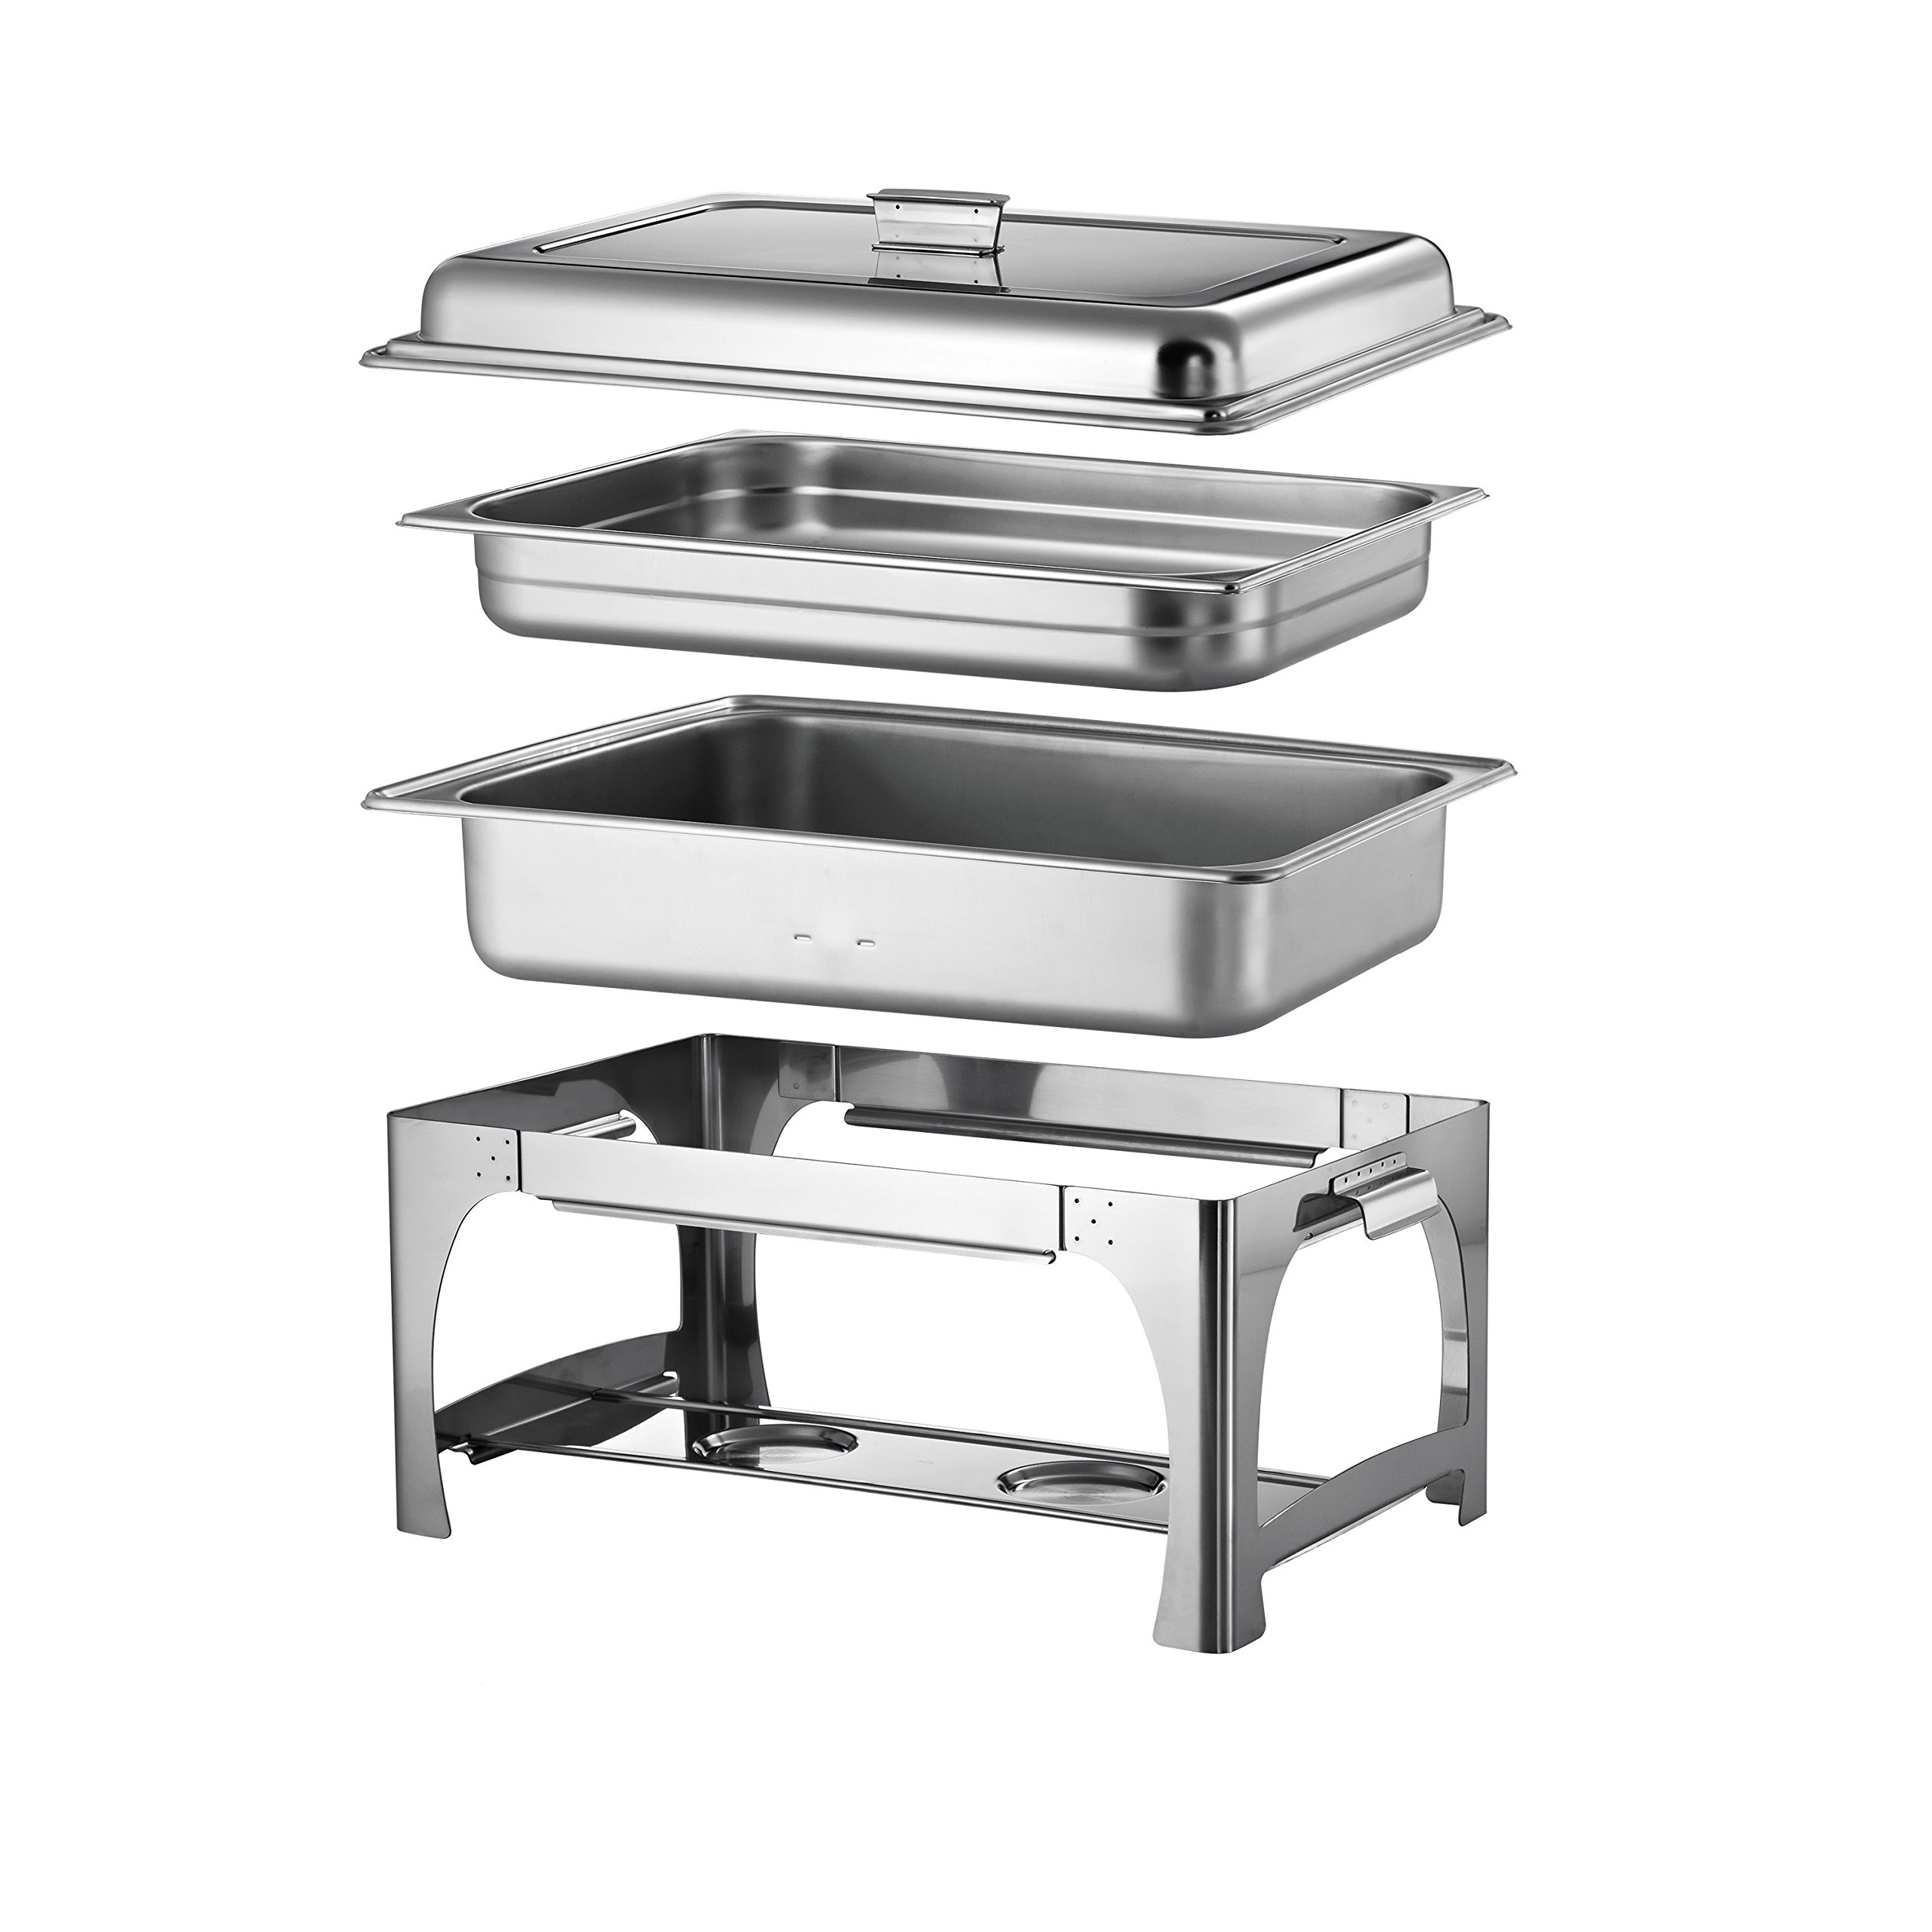 Tramontina Chafing Dish Pro-Line Stainless Steel 9-Quart, 80205/520DS